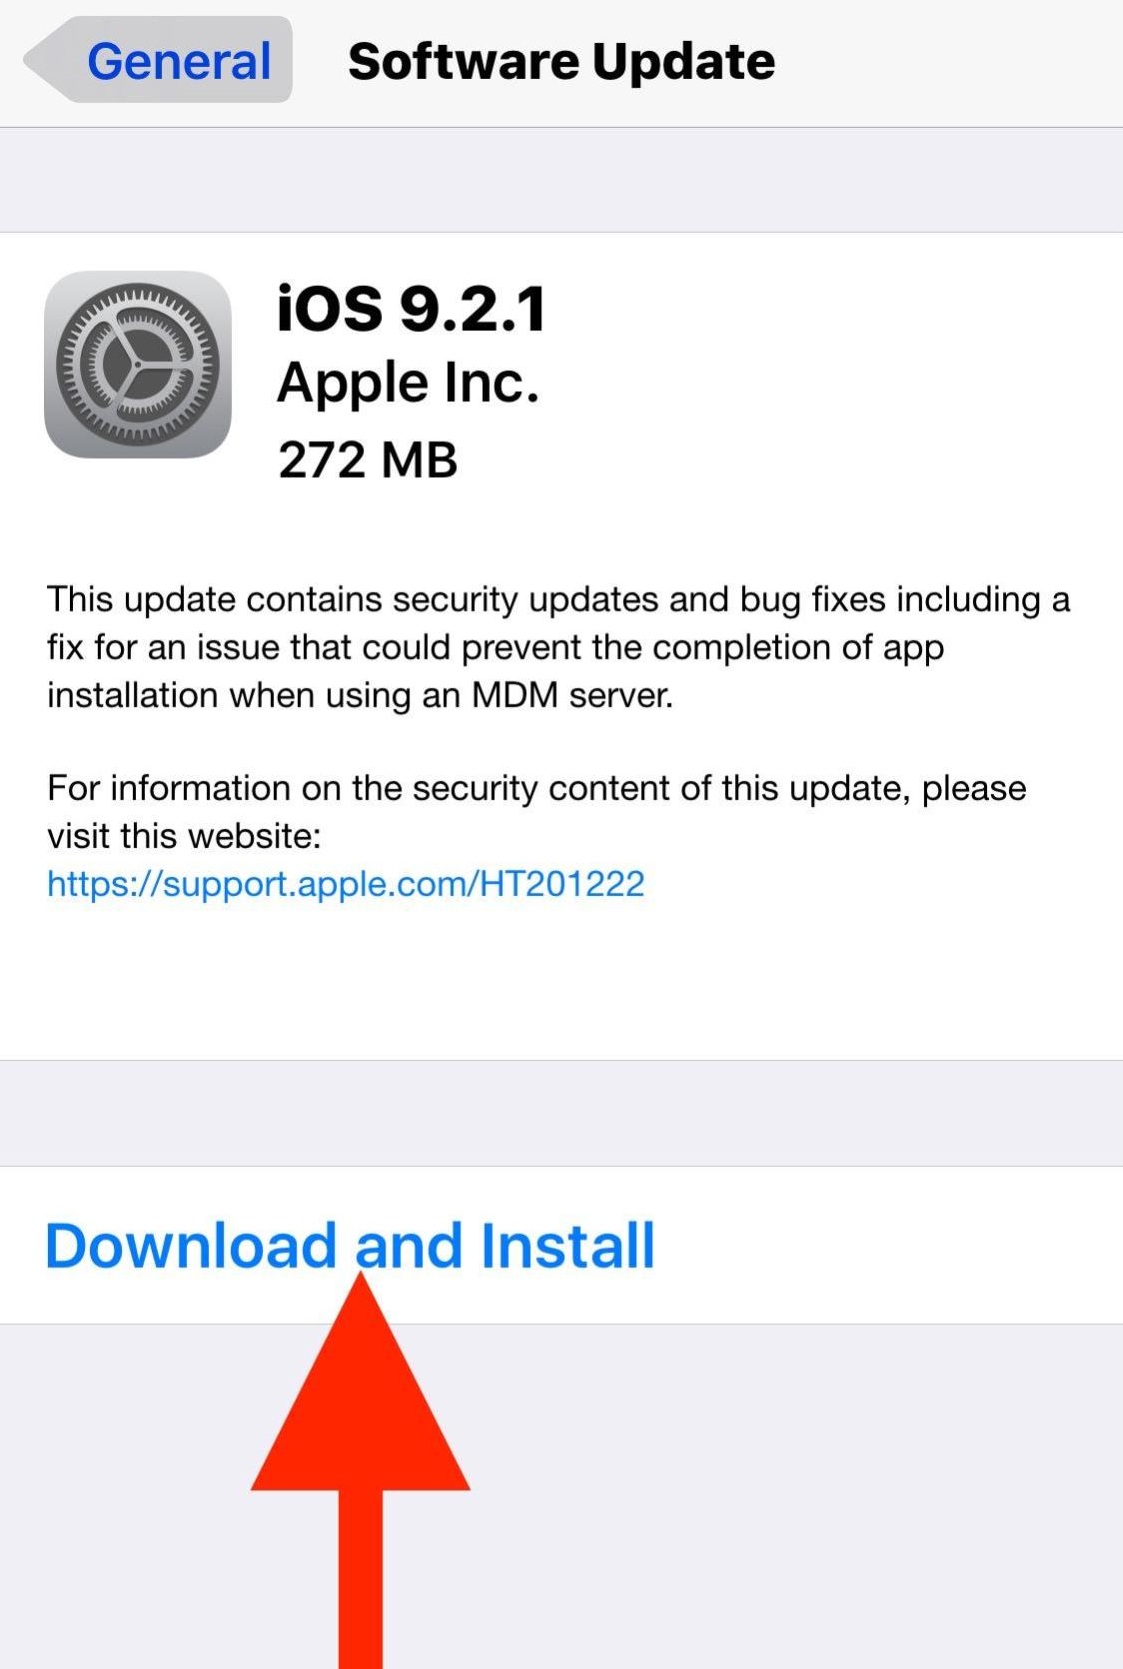 Download and Install iOS updates on iPhone